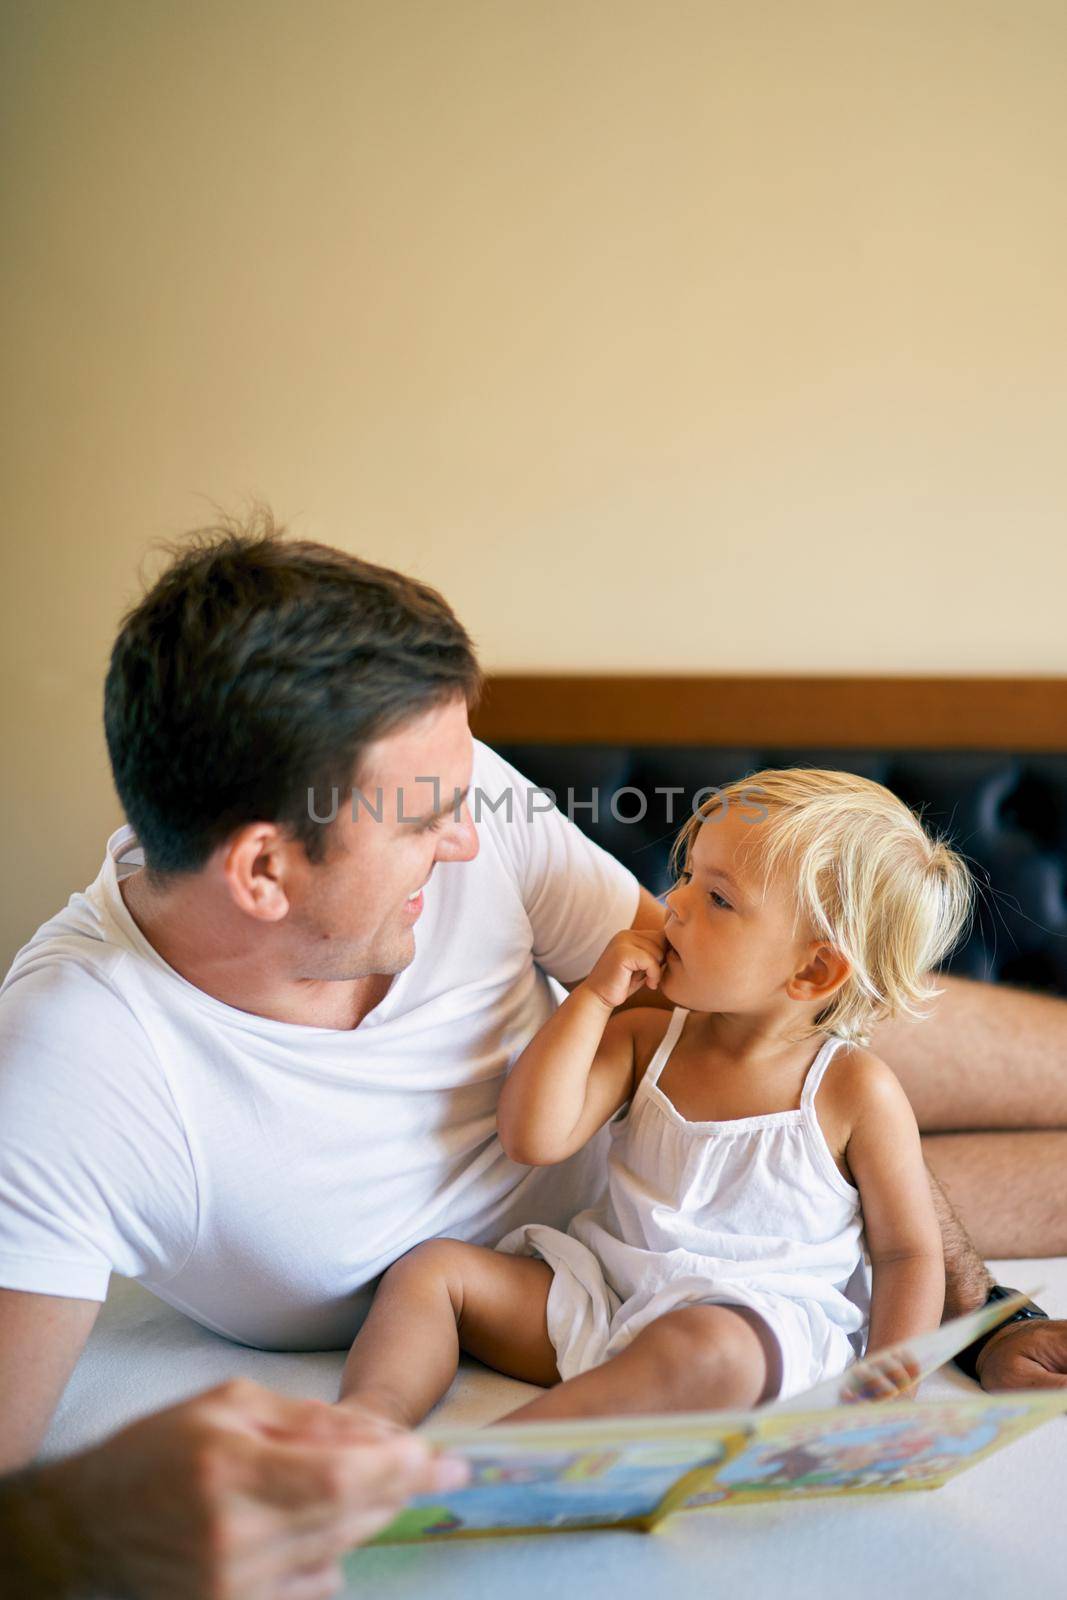 Smiling dad reading colorful book to little girl by Nadtochiy